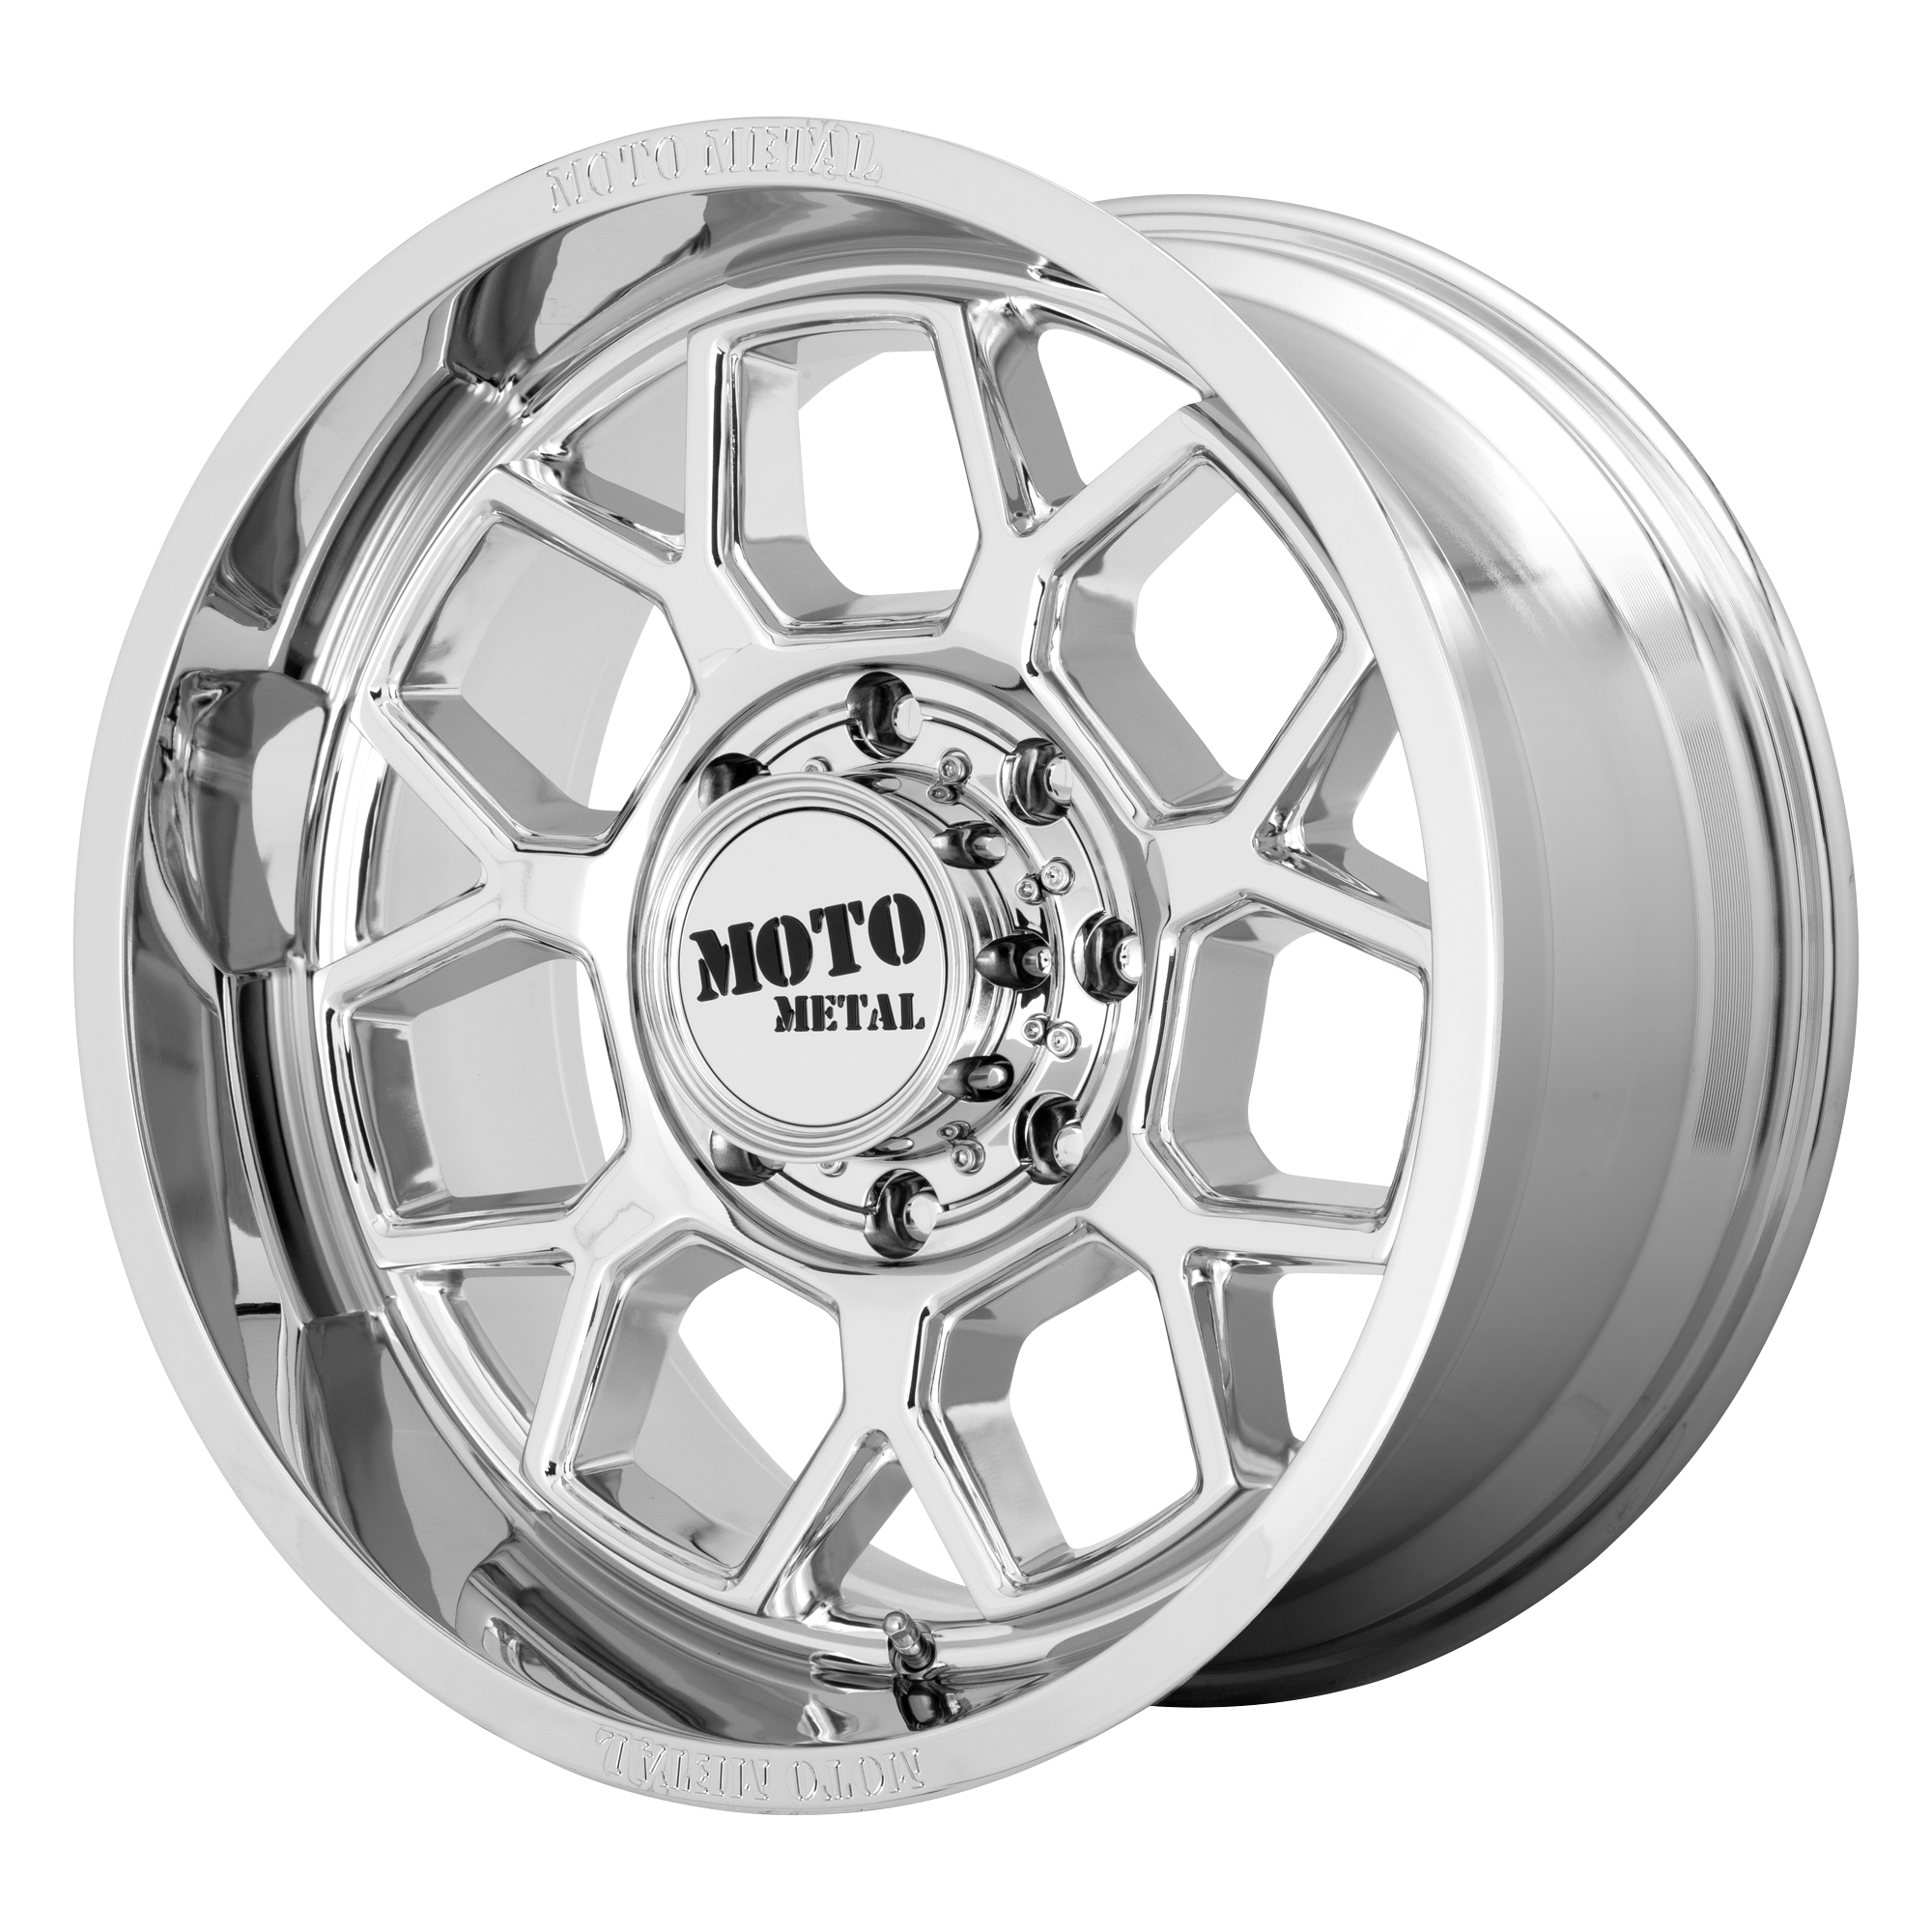 BANSHEE 20x10 8x170.00 CHROME (-18 mm) - Tires and Engine Performance